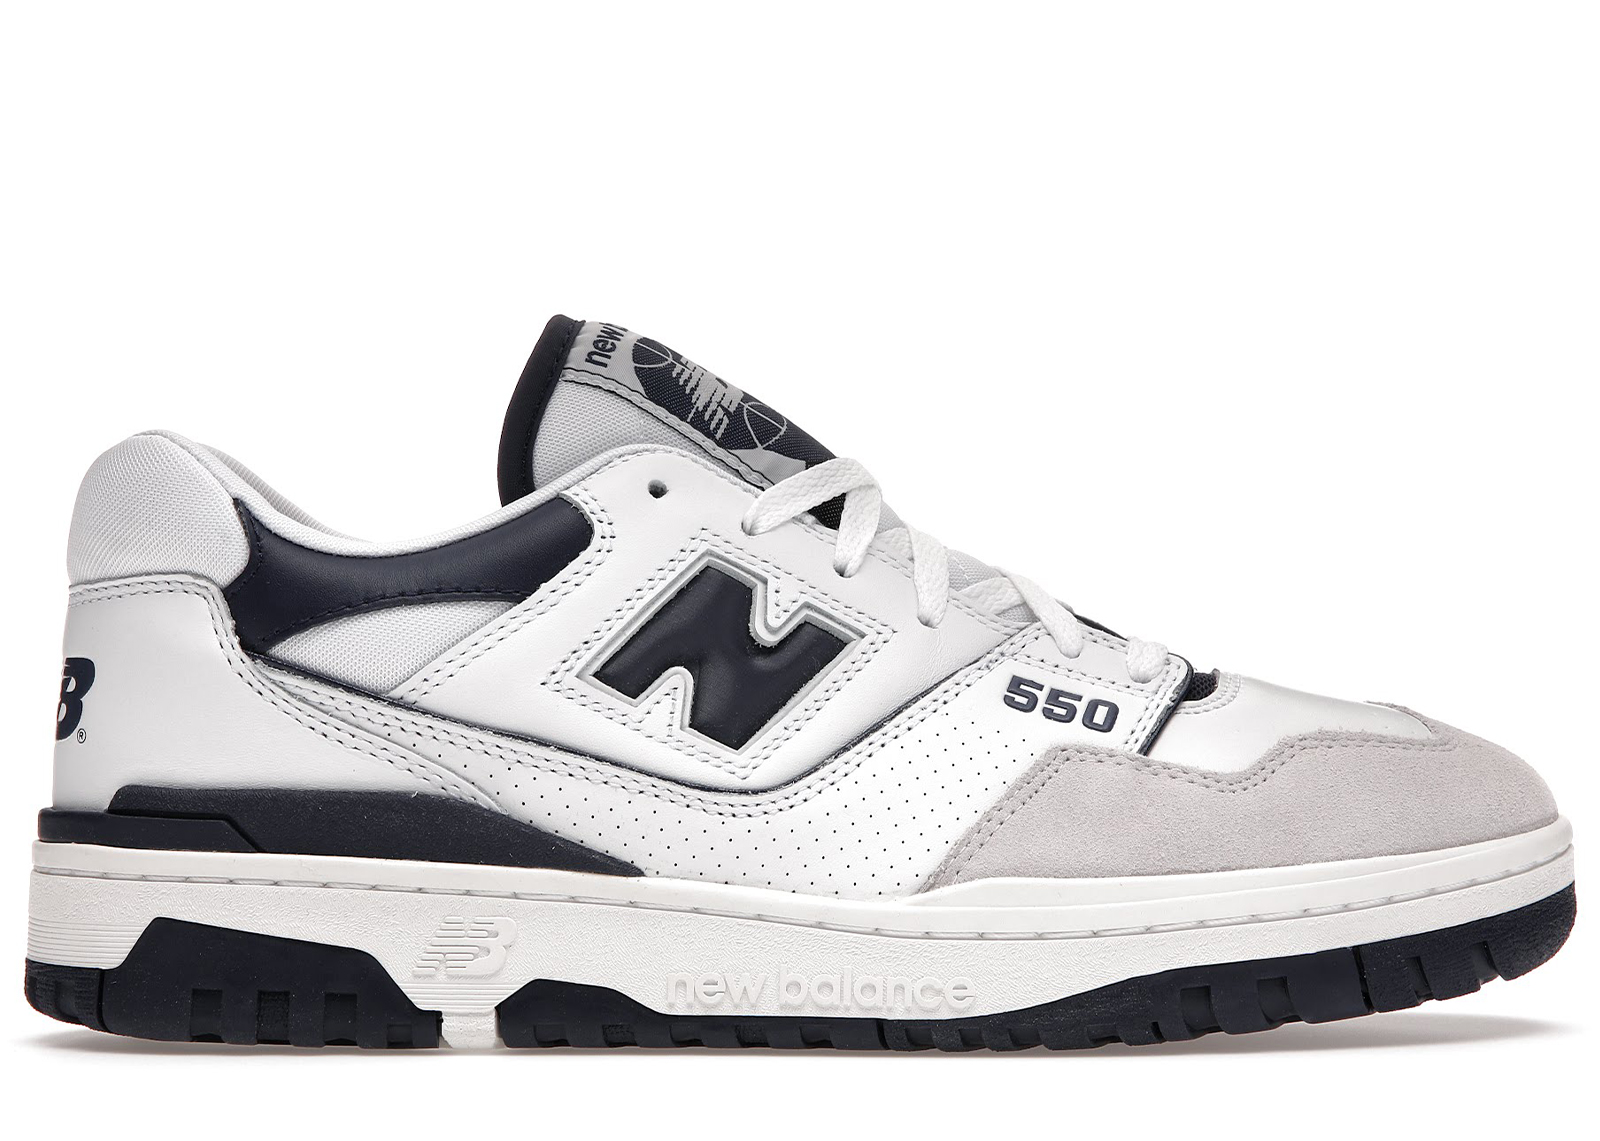 Buy New Balance 550 Shoes & Deadstock Sneakers